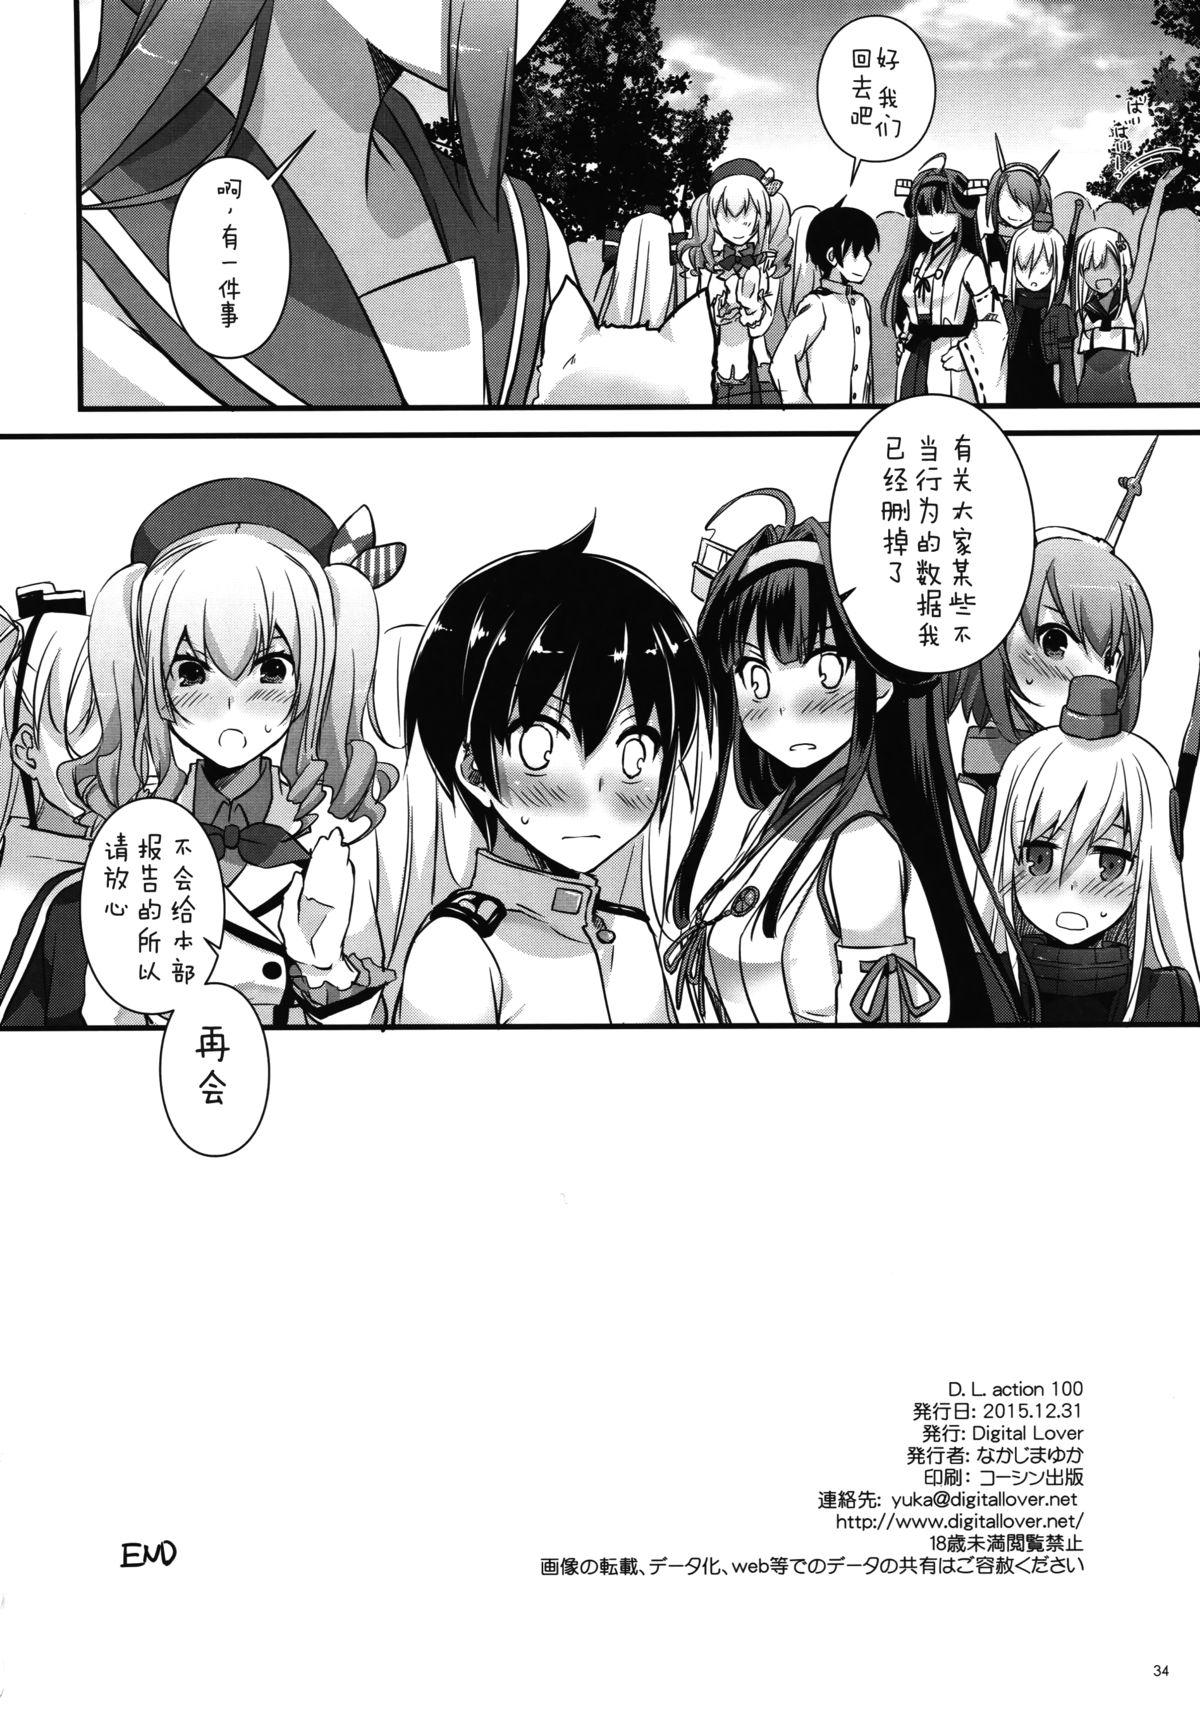 Best D.L. action 100 - Kantai collection Chastity - Page 34